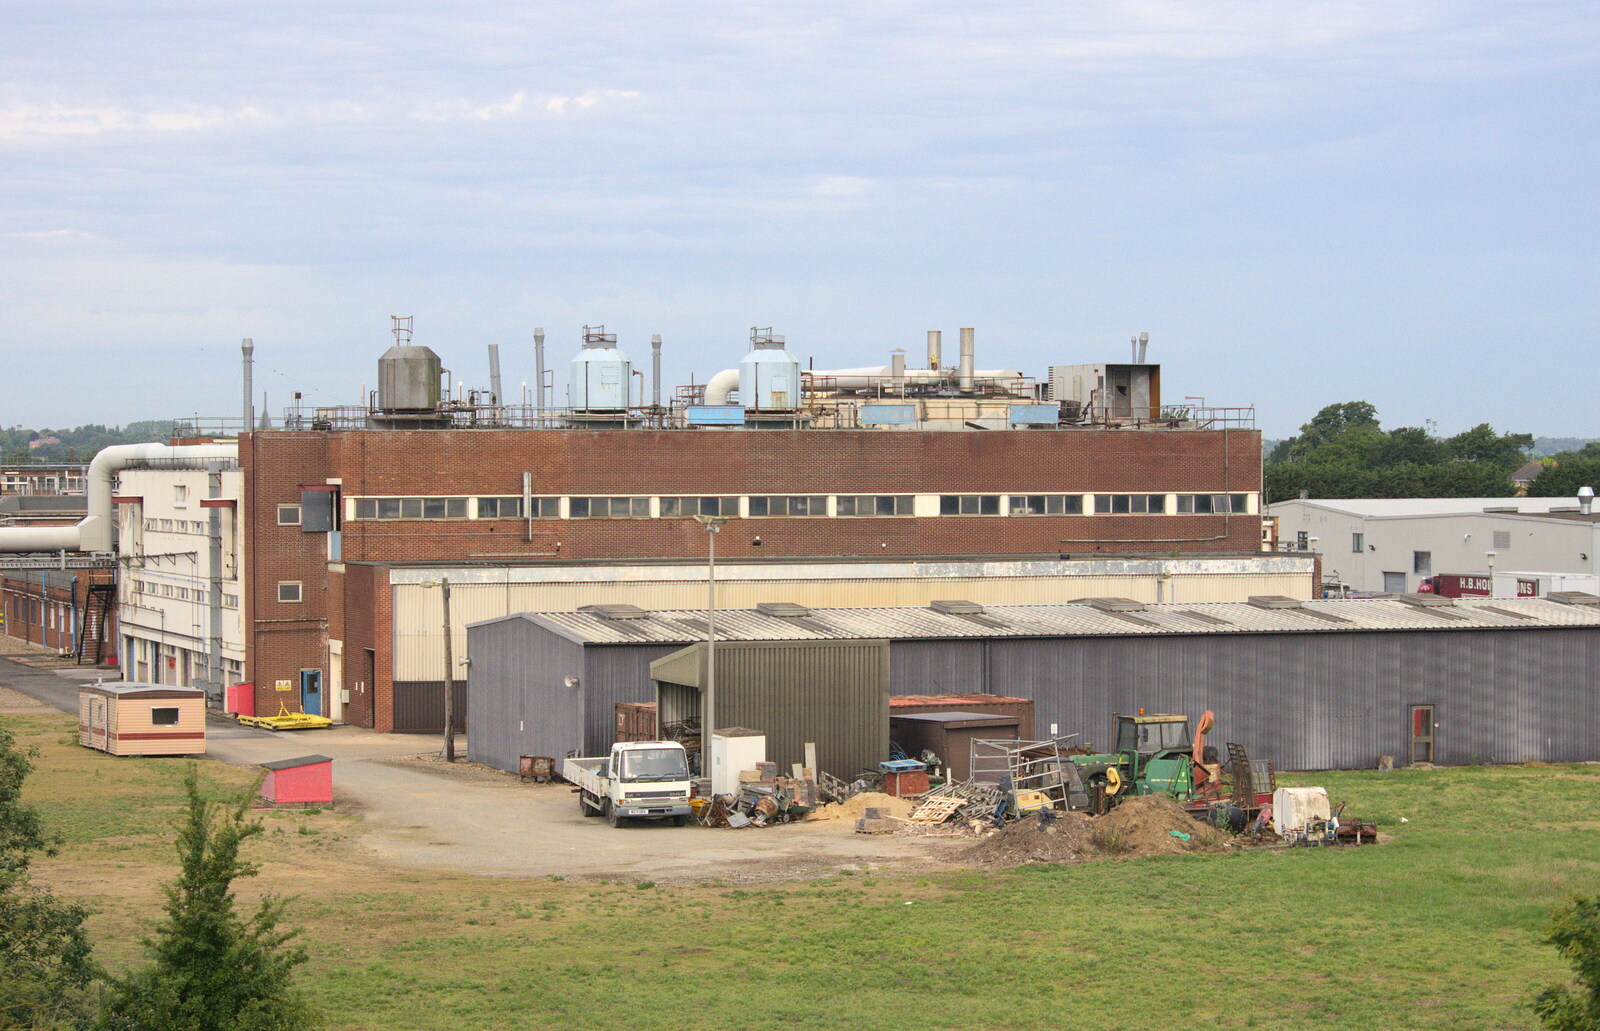 Possible still-working factory at Brantham from It's a SwiftKey Knockout, Richmond Rugby Club, Richmond, Surrey - 7th July 2015